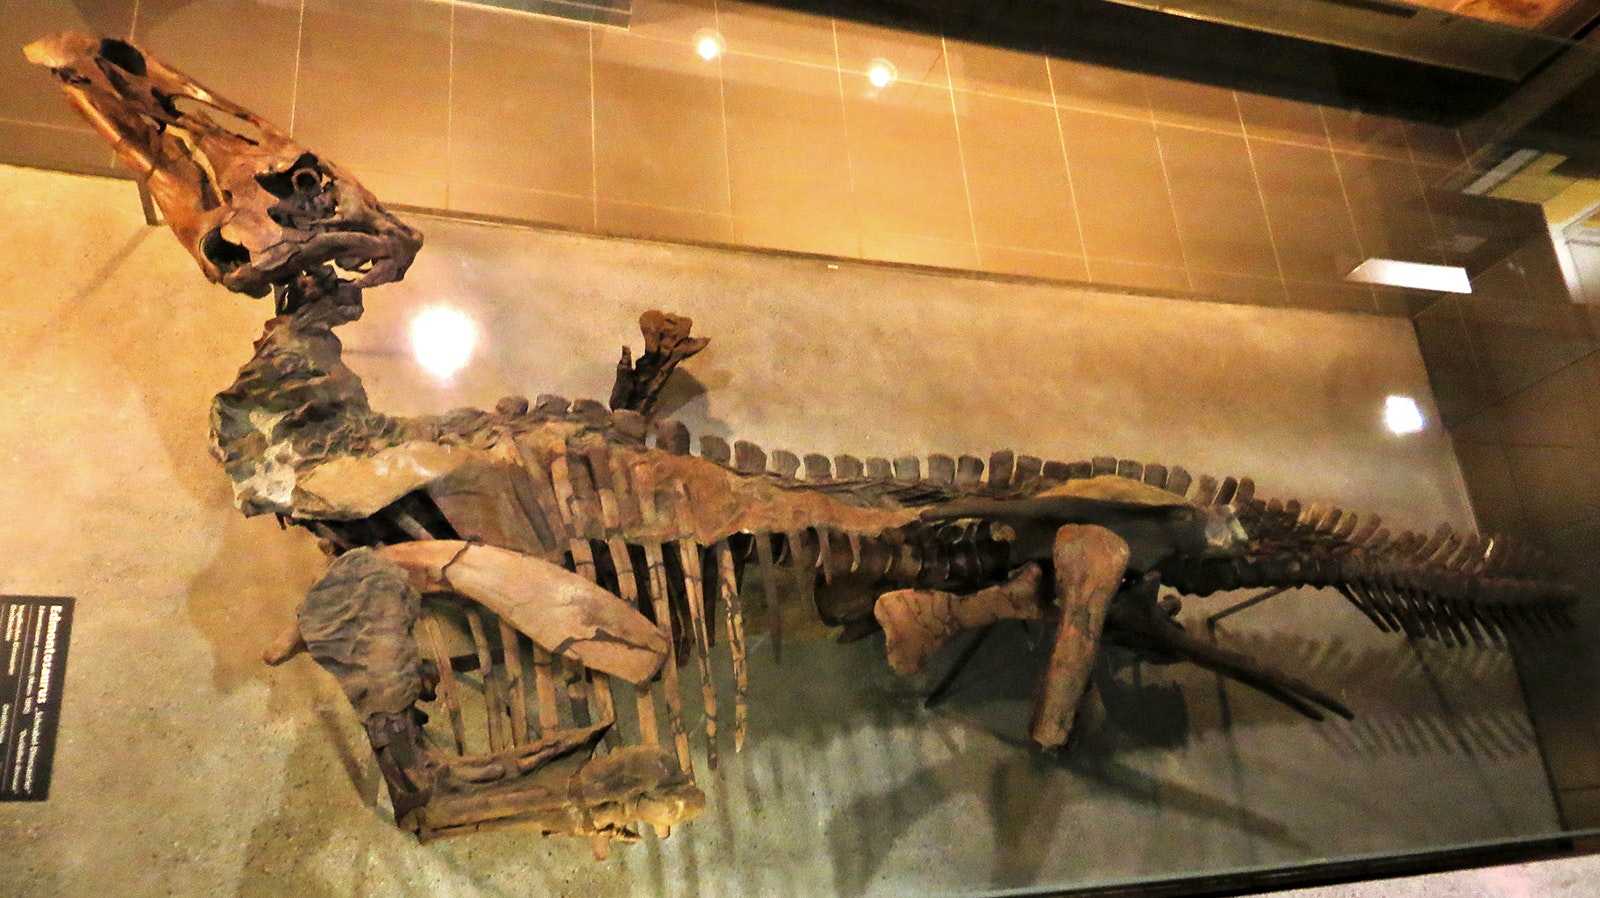 A mummified Edmontosaurus on display in the Naturmuseum Senckenberg in Frankfurt, Germany. This fossil, found in Converse County, is so well preserved that several patches of skin cover parts of the skeleton. This specimen and two Triceratops skulls from the same area were sold to the German museum in 1910.